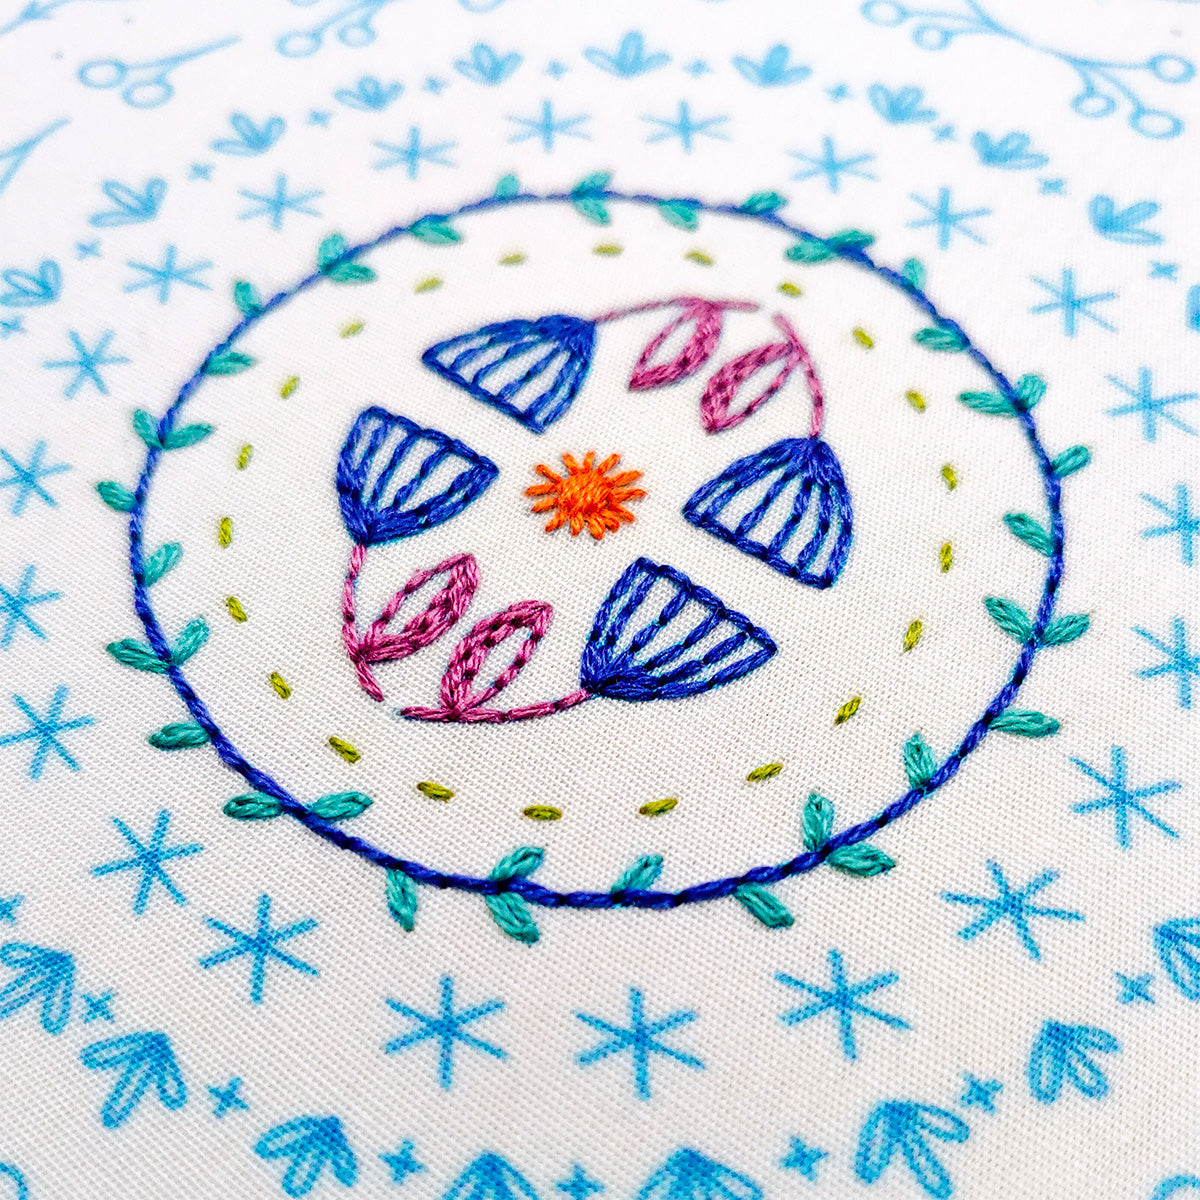 Stitches in the Round Hand Embroidery Kit